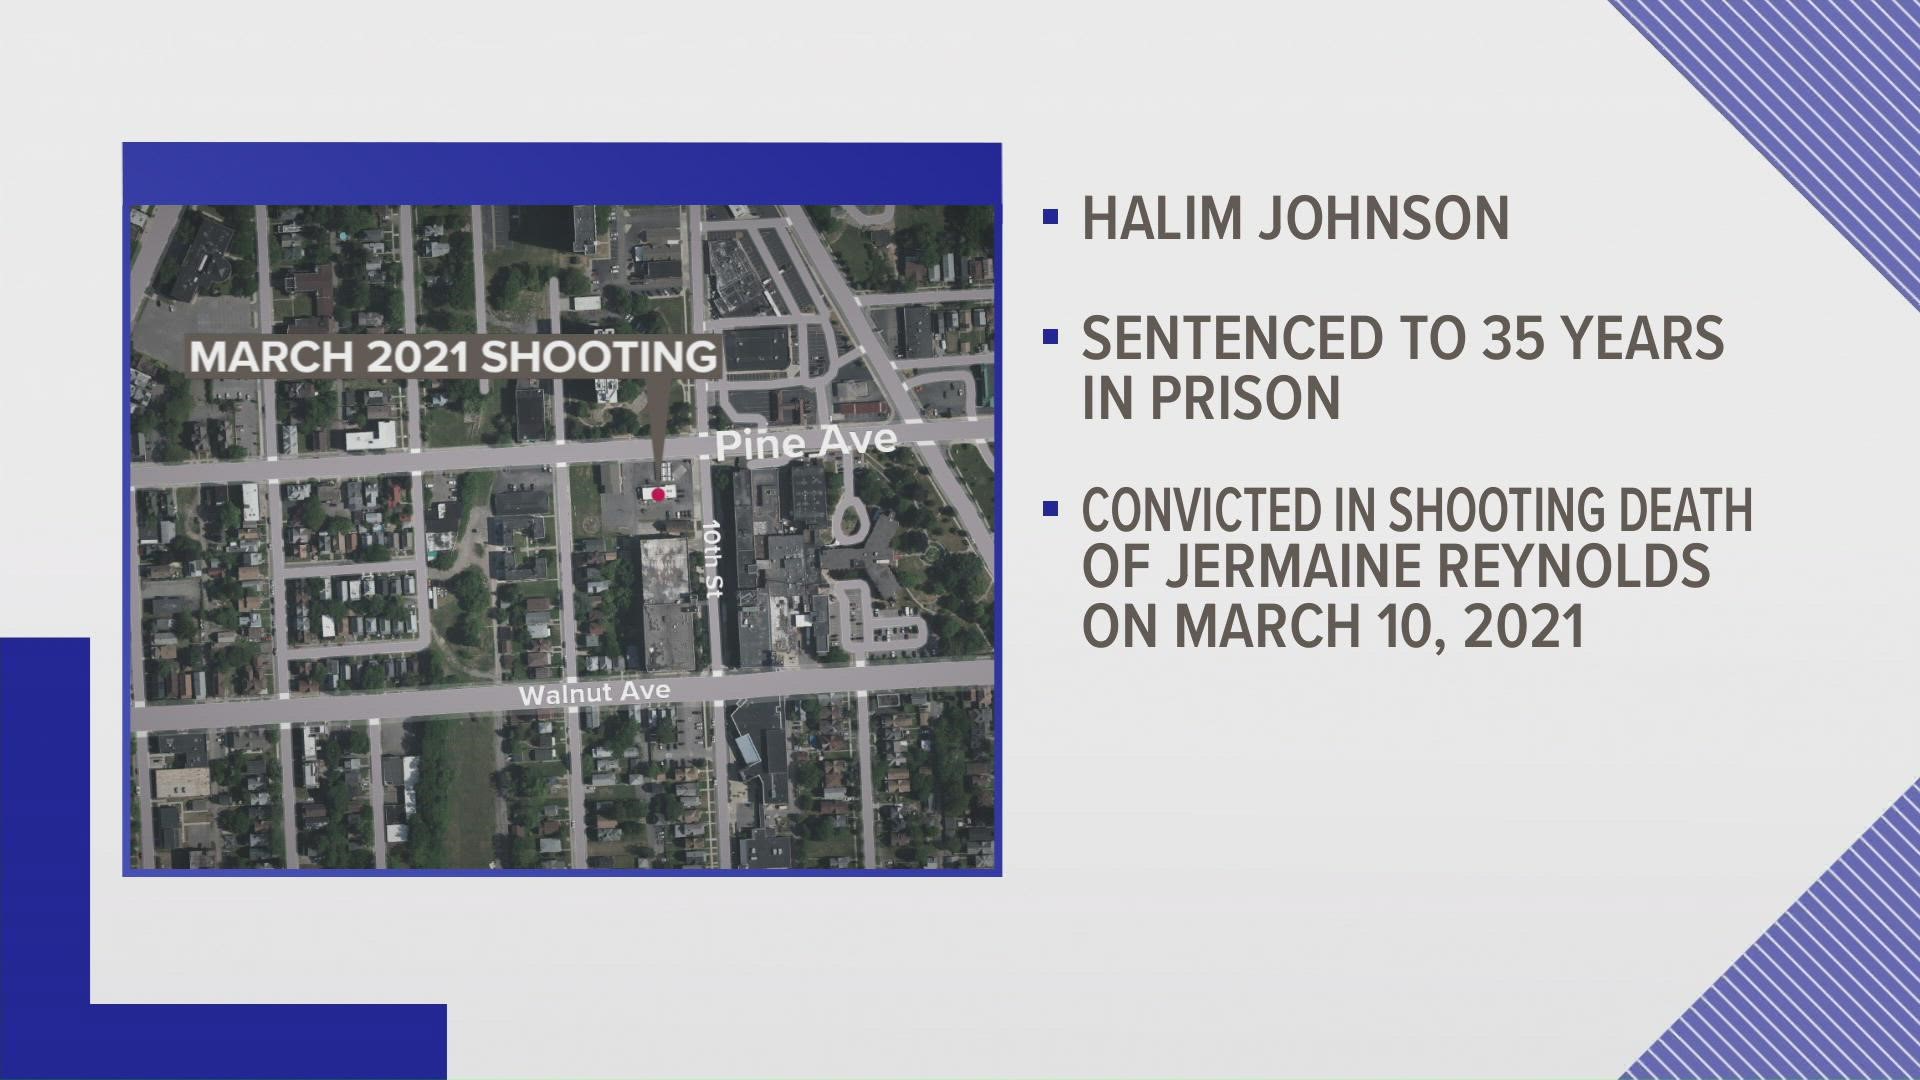 Halim Johnson had been convicted for manslaughter and a weapons charge in the death of Jermaine Reynolds.